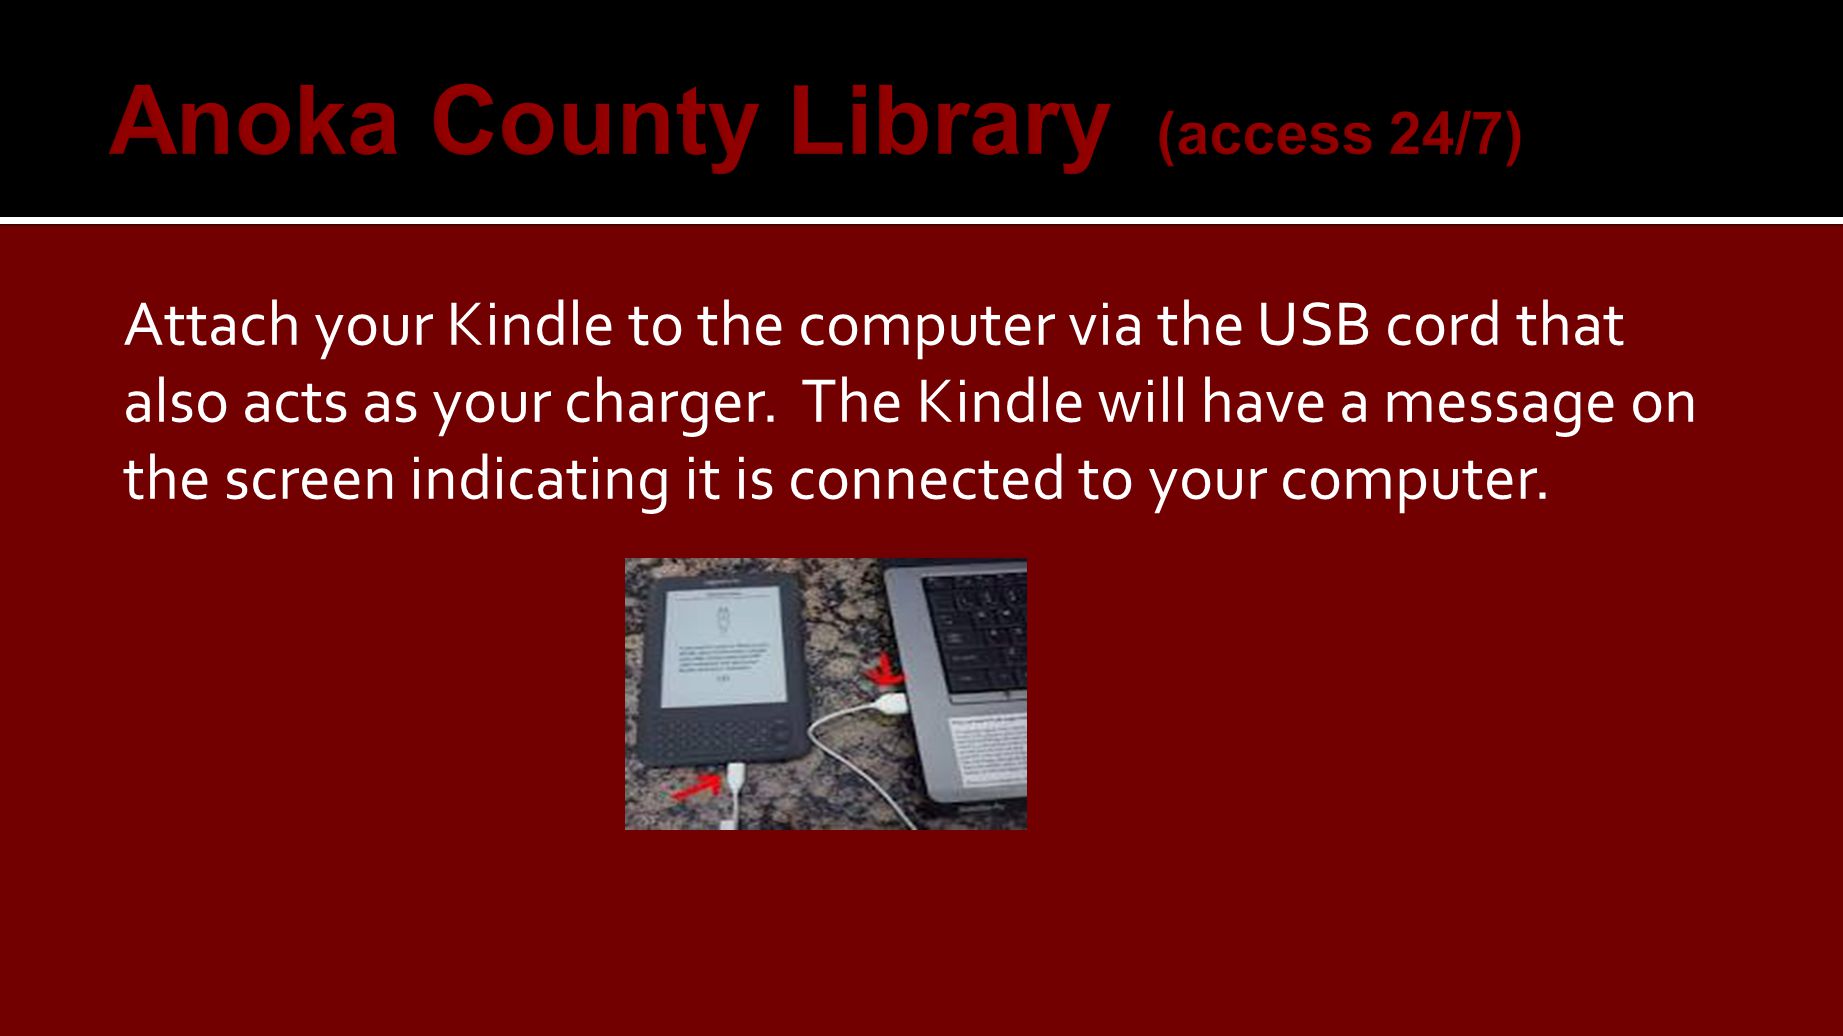 Attach your Kindle to the computer via the USB cord that also acts as your charger.